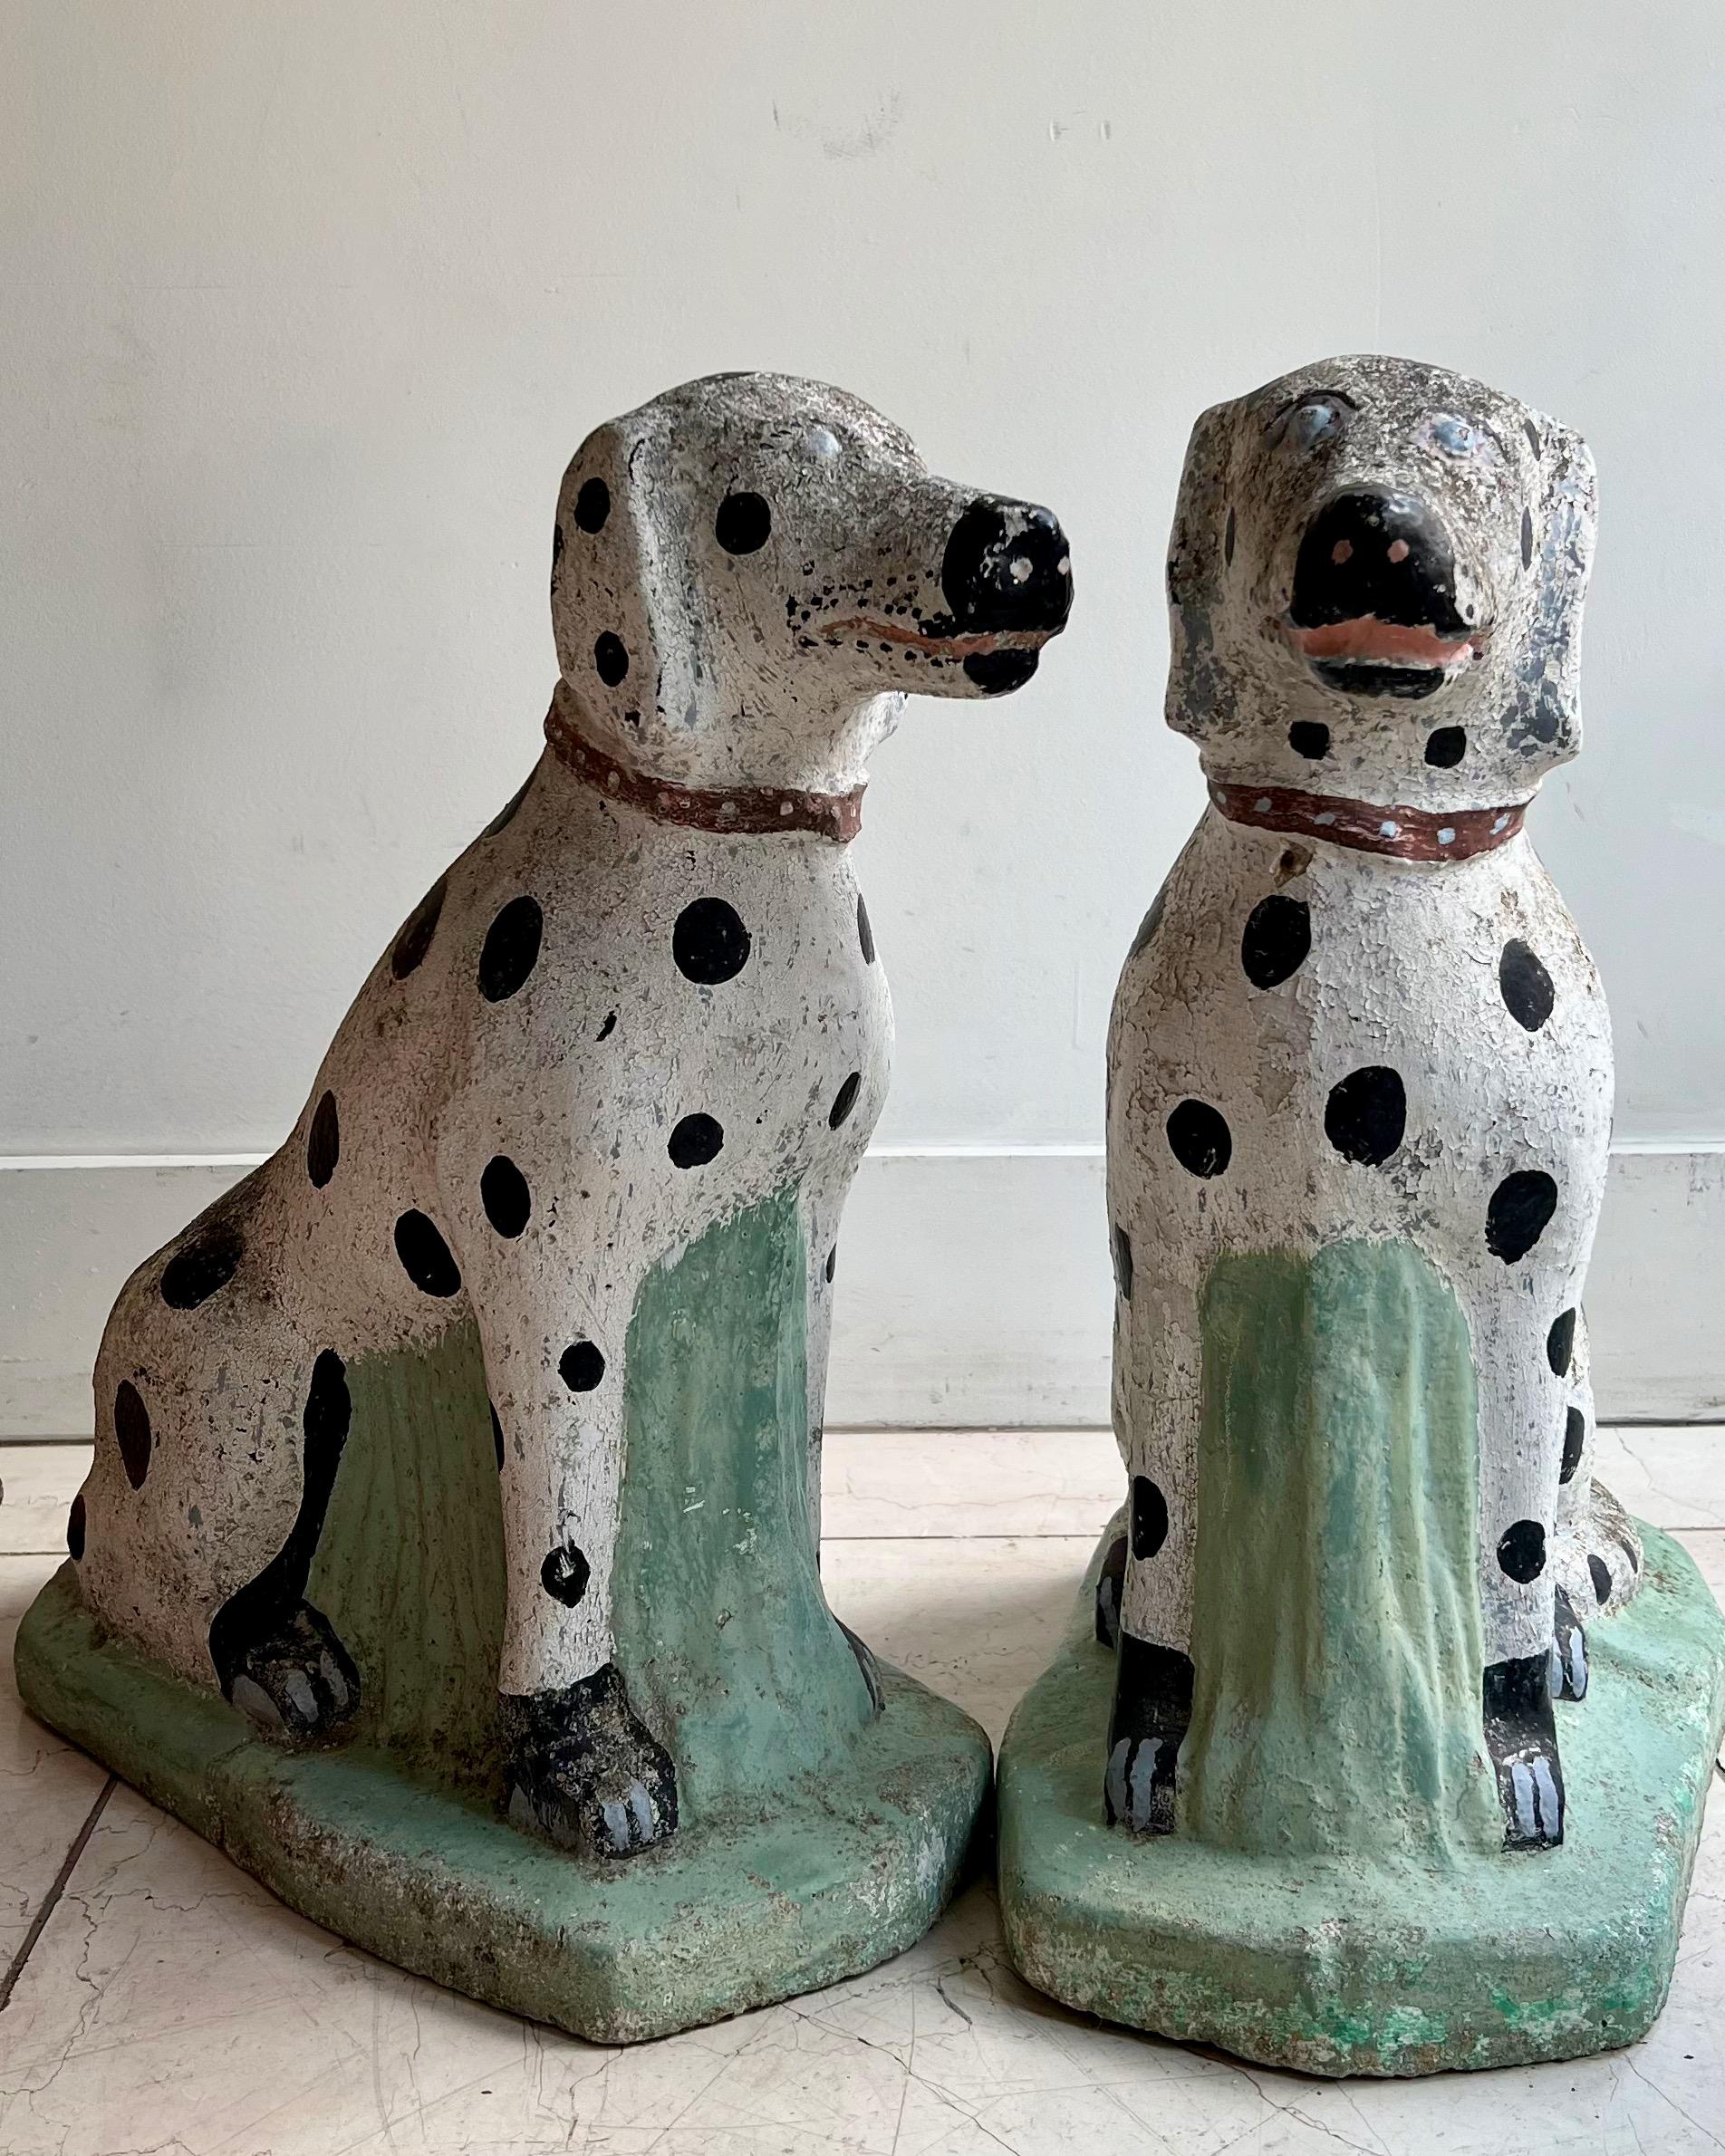 A large pair of vintage French garden dog Dalmatian statues with lovely weathered, patinated effect, charmingly hand painted decor for any garden or doorstep.
Base size: 10.50